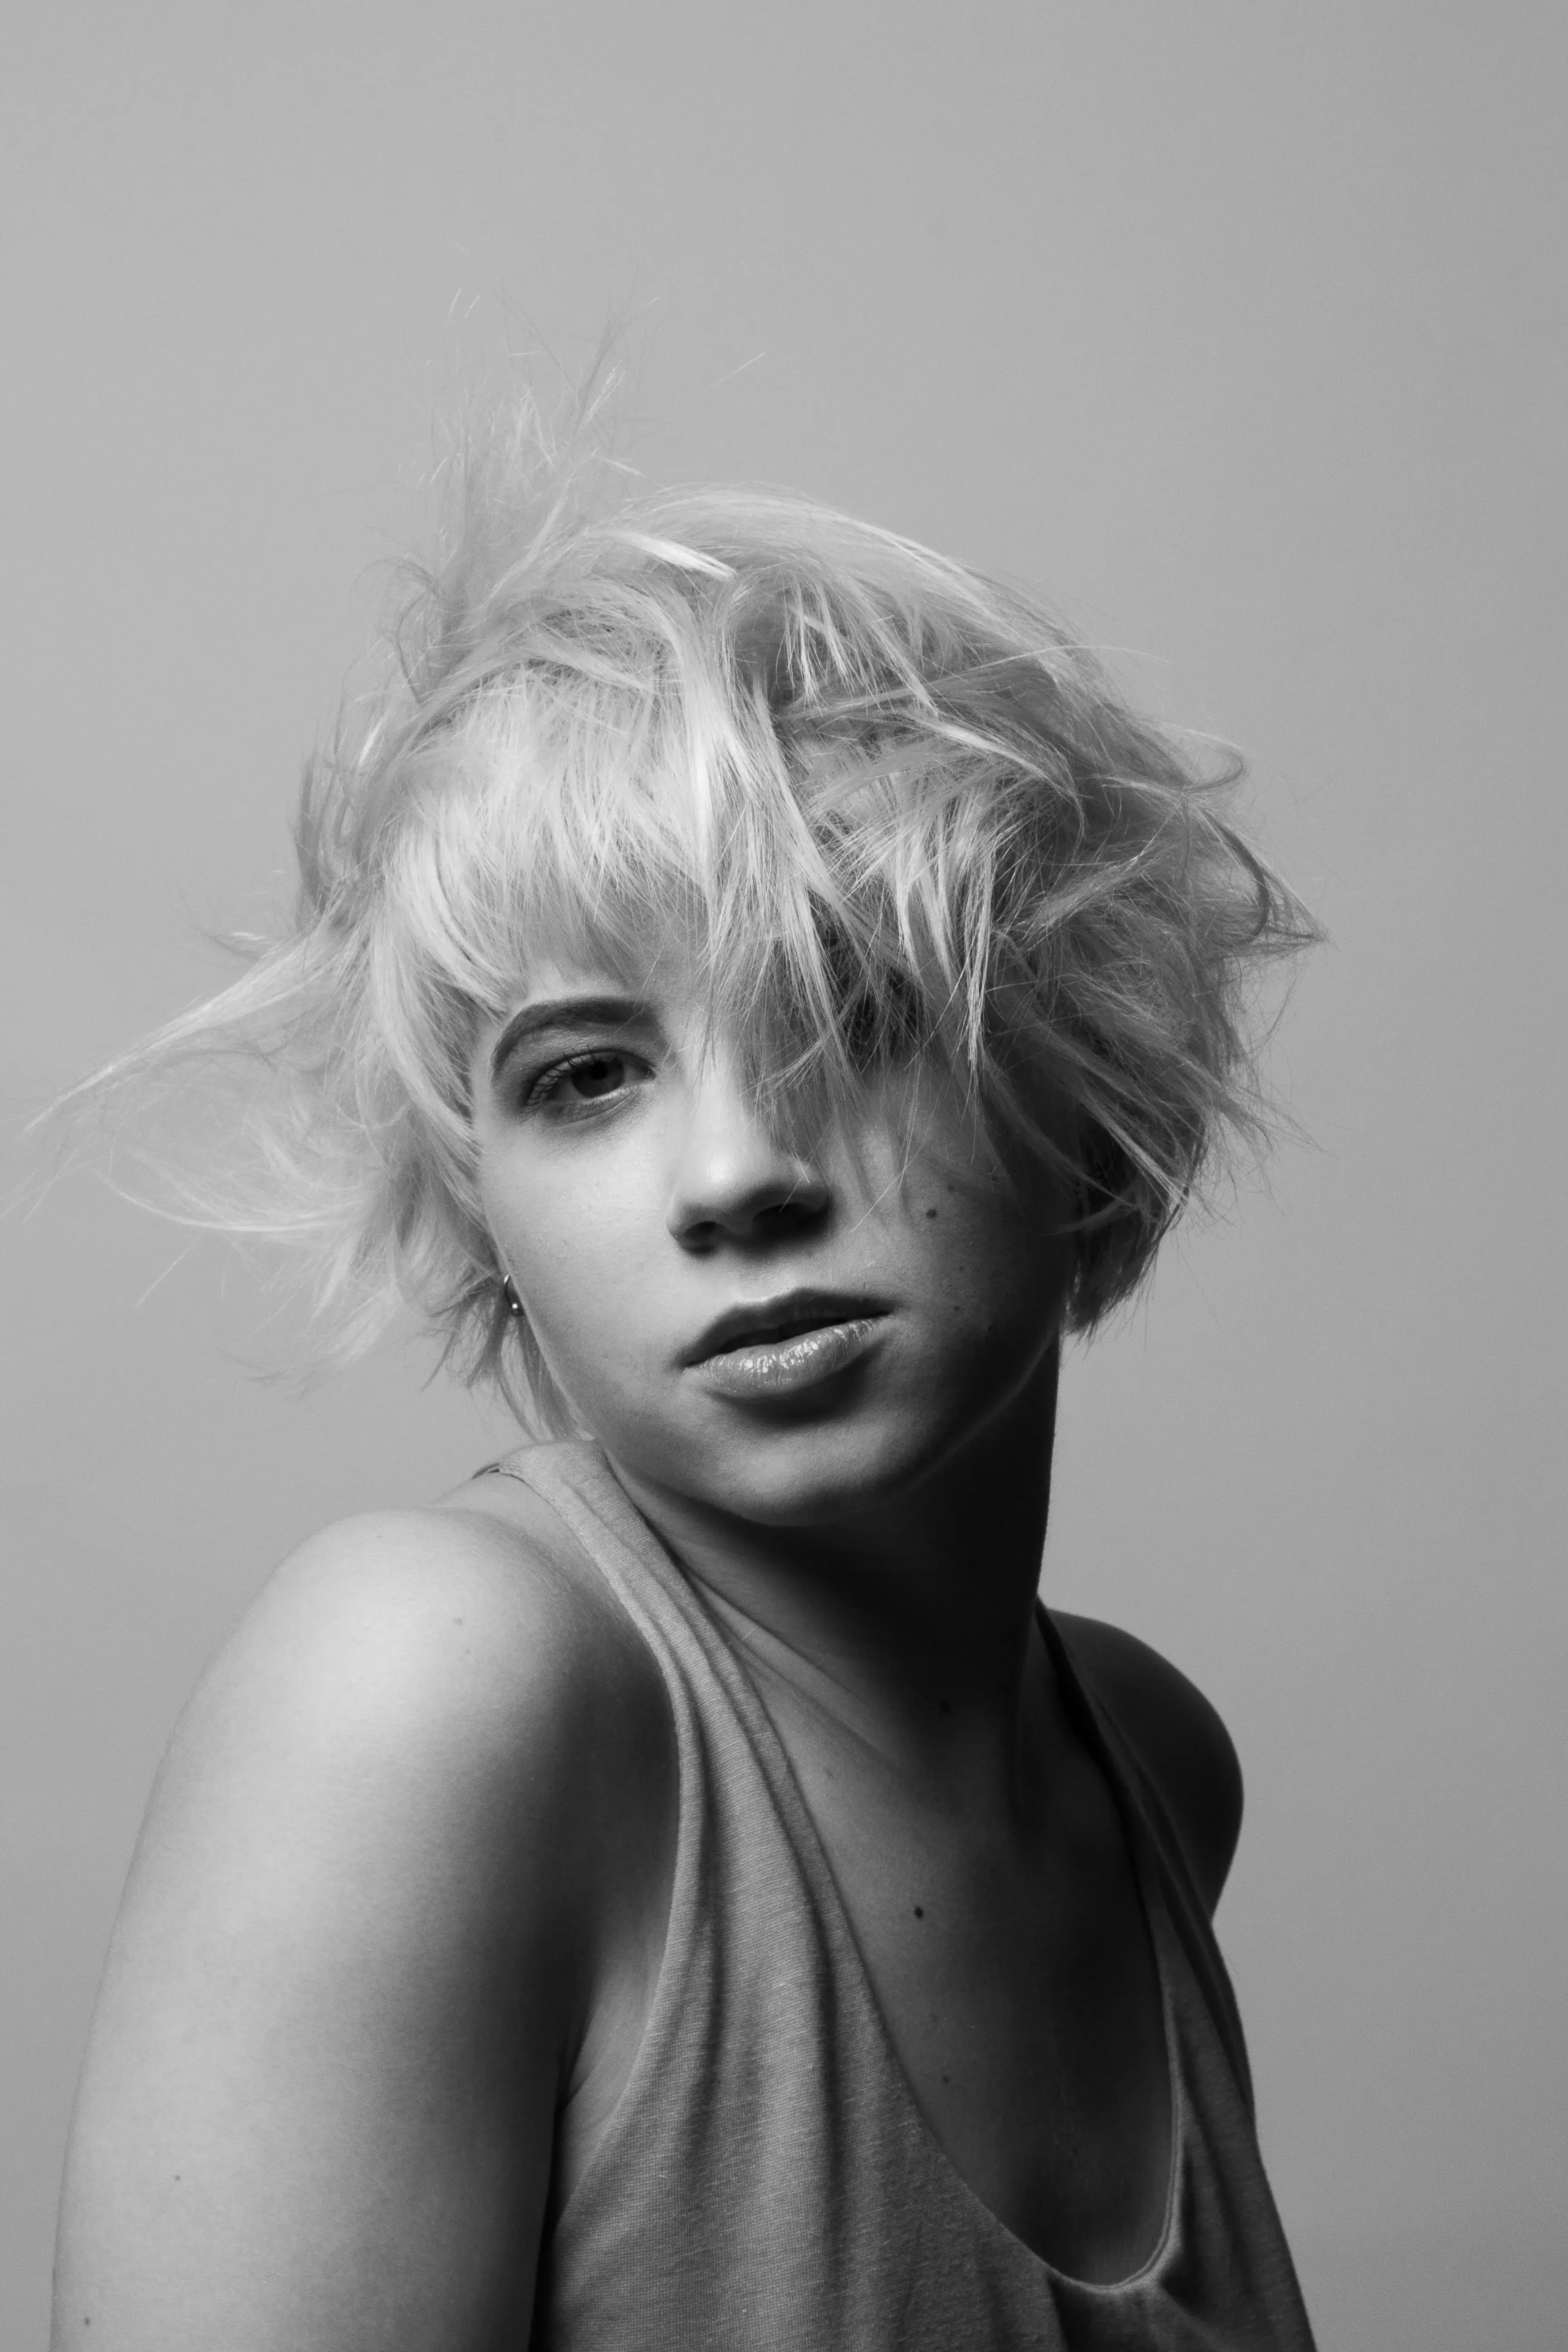 Woman with blonde messy hair in black and white